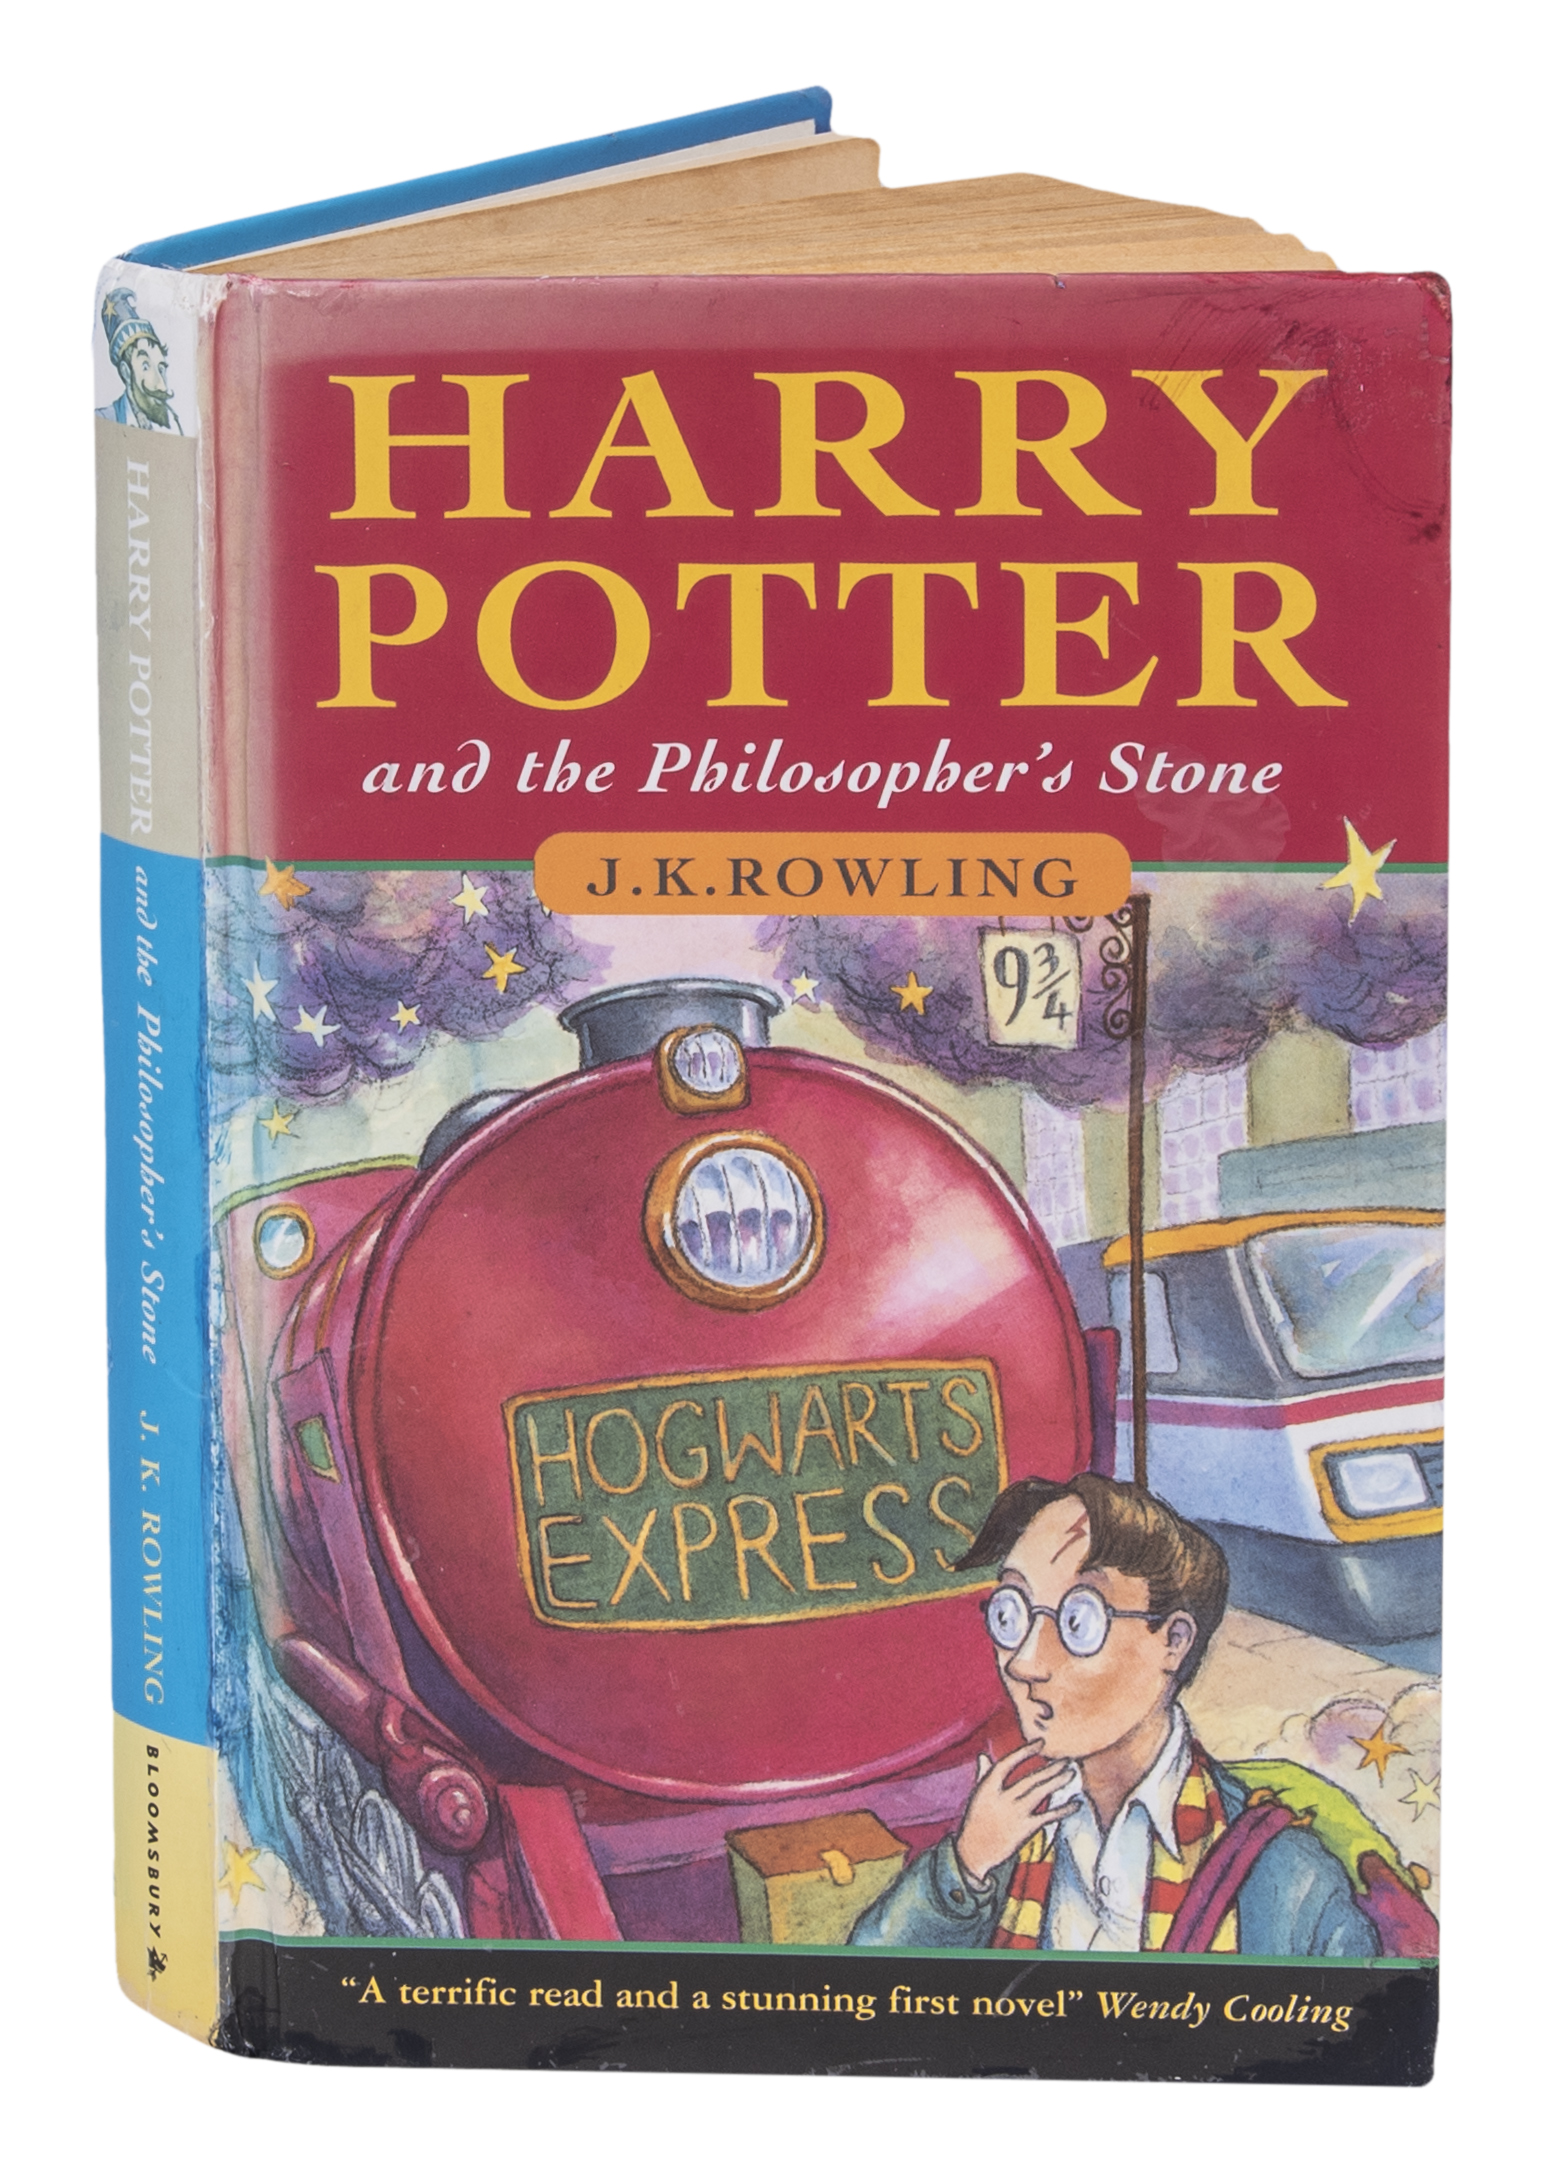 Lot Detail First Edition "Harry Potter and the Philosopher's Stone" by J.K. Rowling Hard Cover